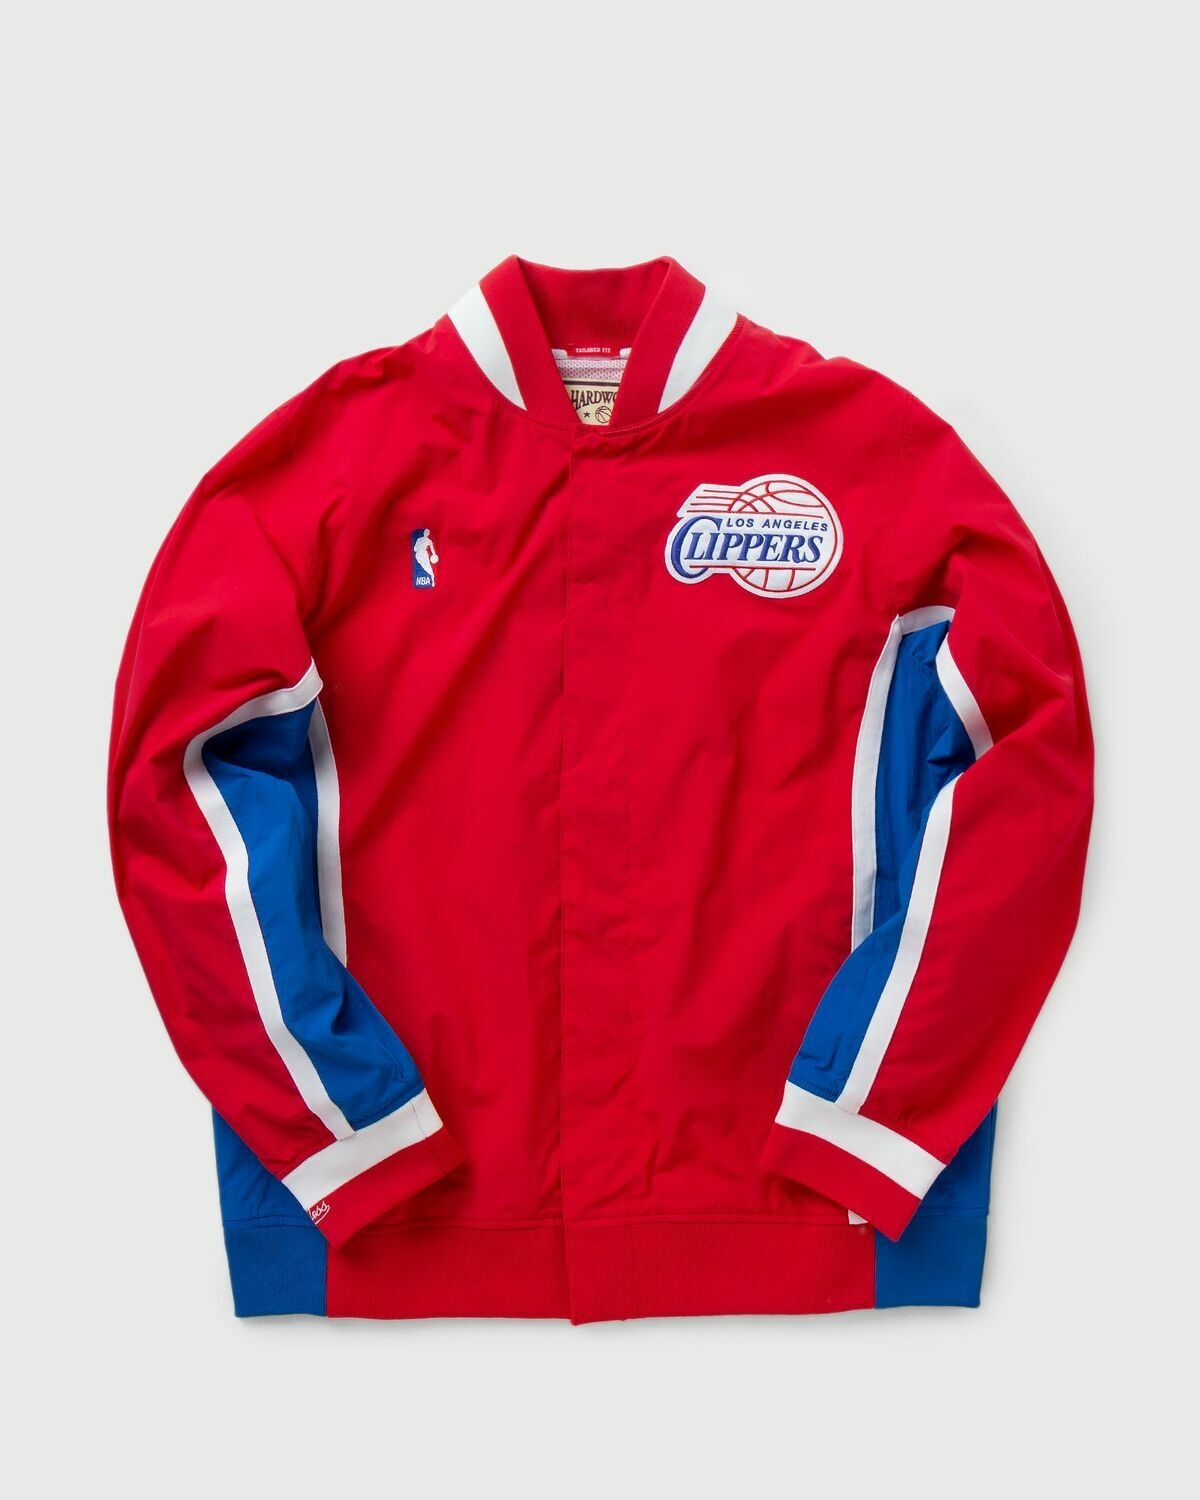 Mitchell & Ness Nba Authentic Jacket Los Angeles Clippers 1995 96 Red - Mens - College Jackets/Track Jackets